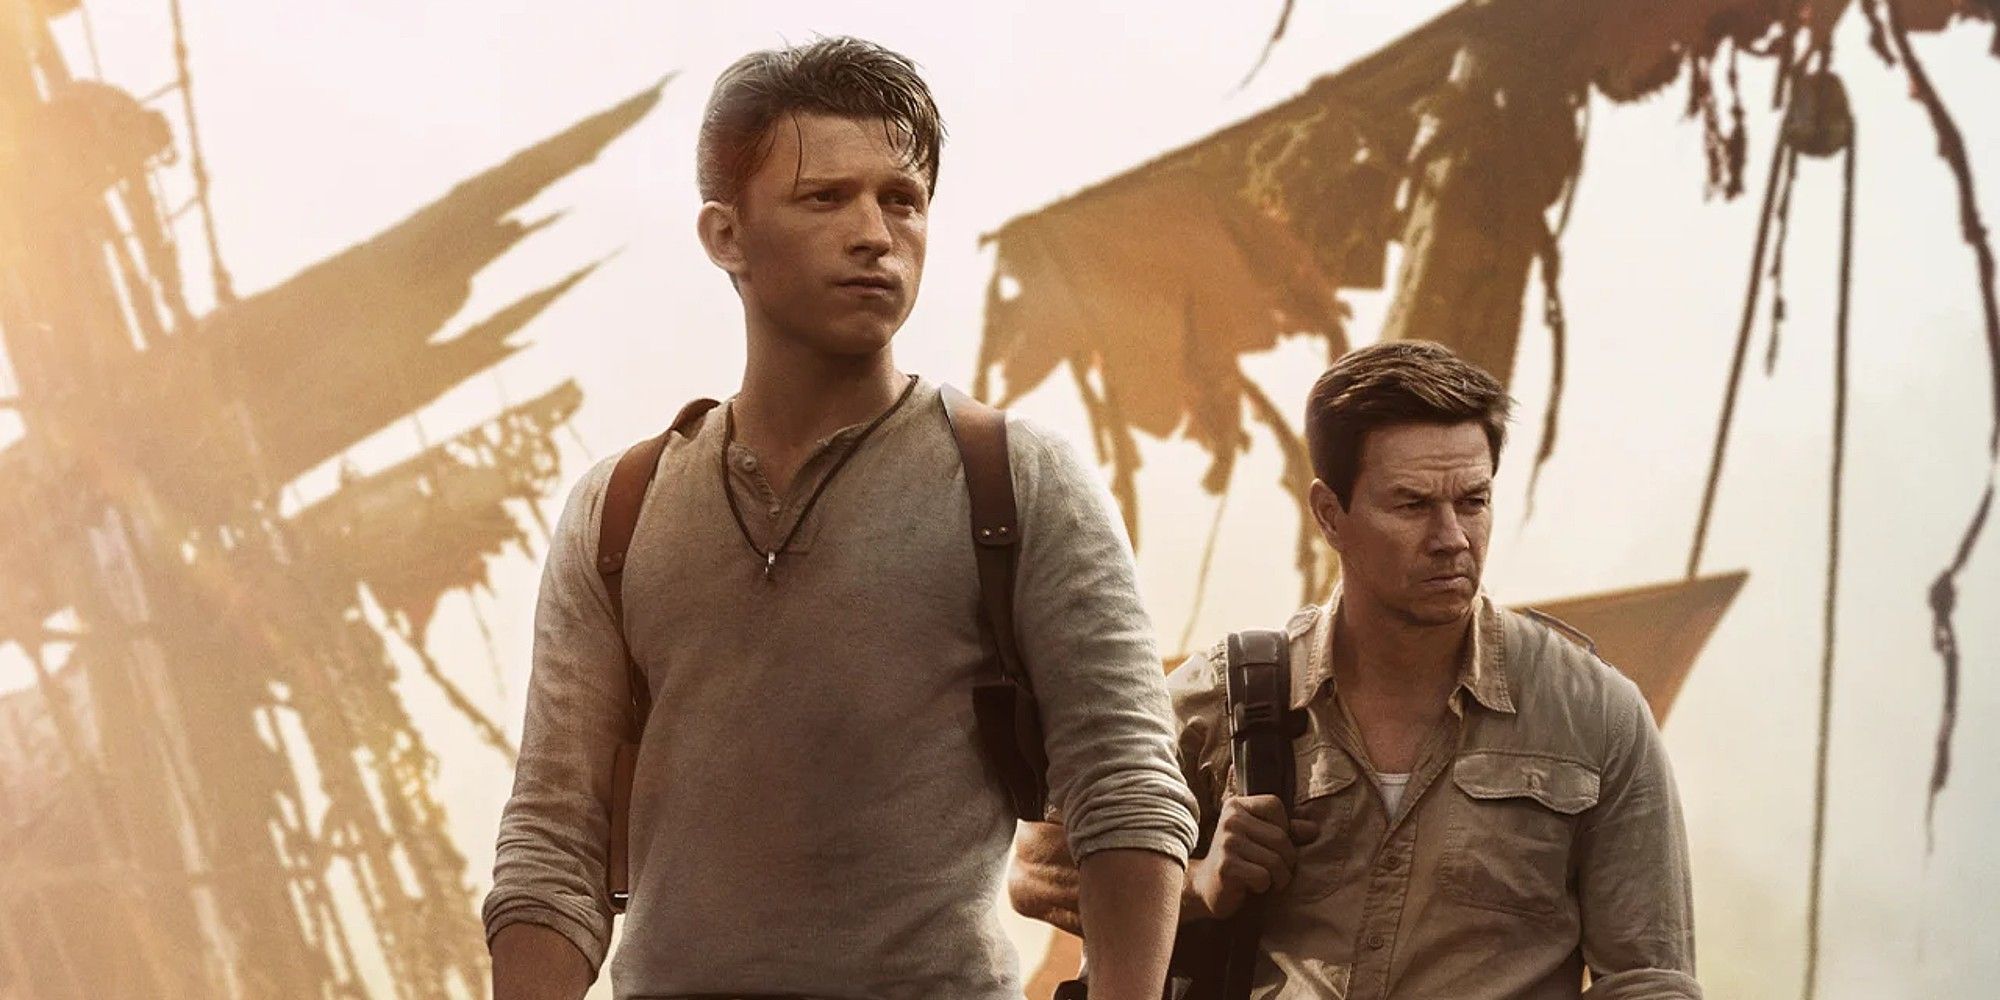 Uncharted Movie's Official Poster Is Out, And Fans Aren't Loving It